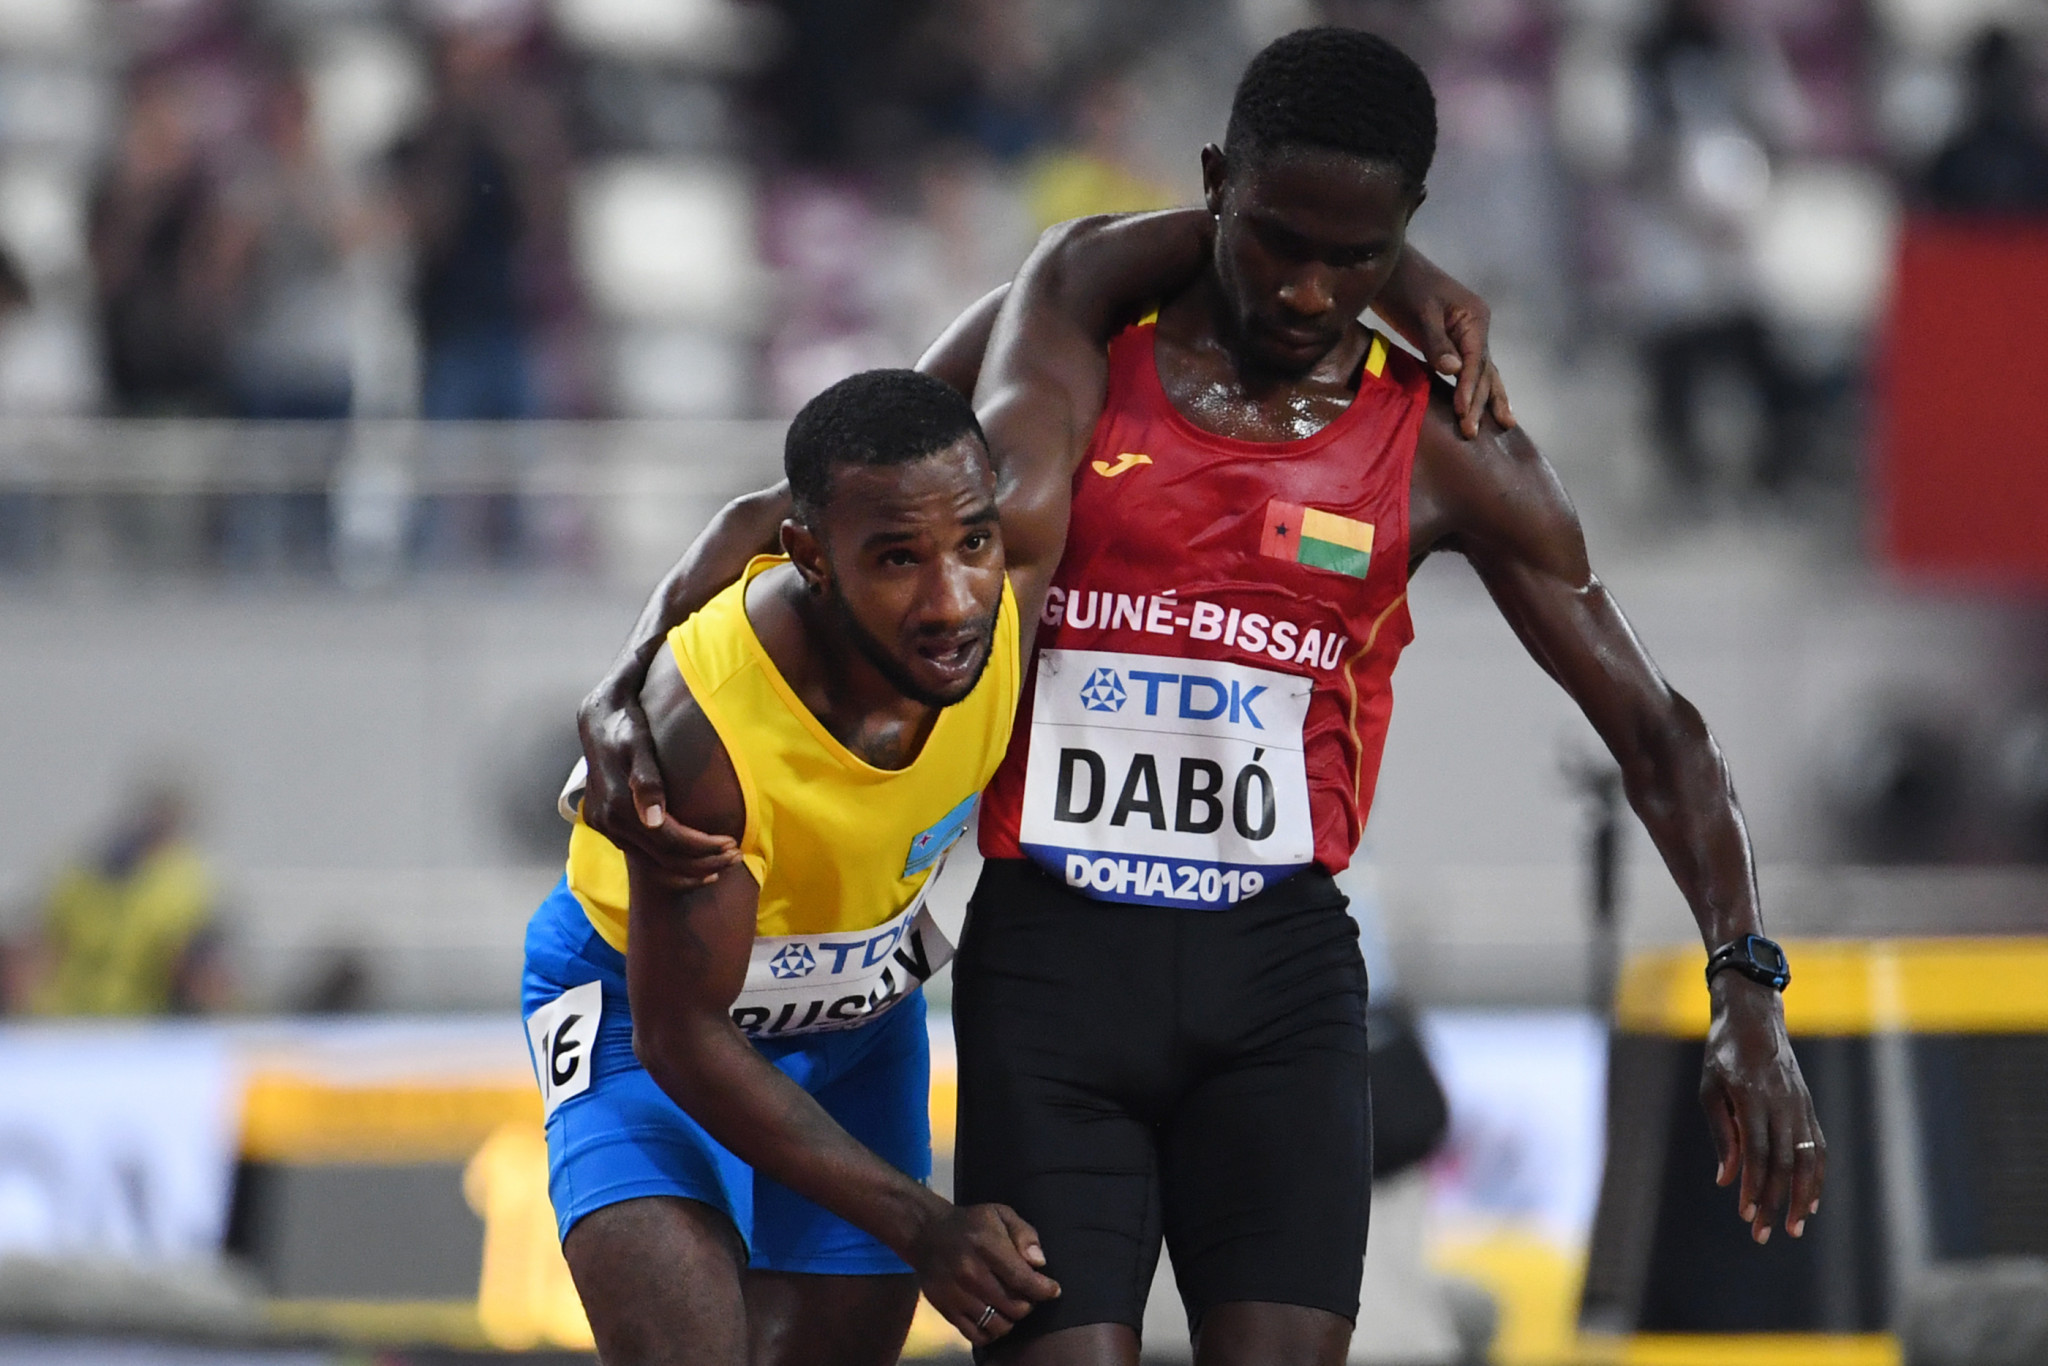 Guinea-Bissau runner makes a name at IAAF World Championships with selfless assistance of stricken opponent